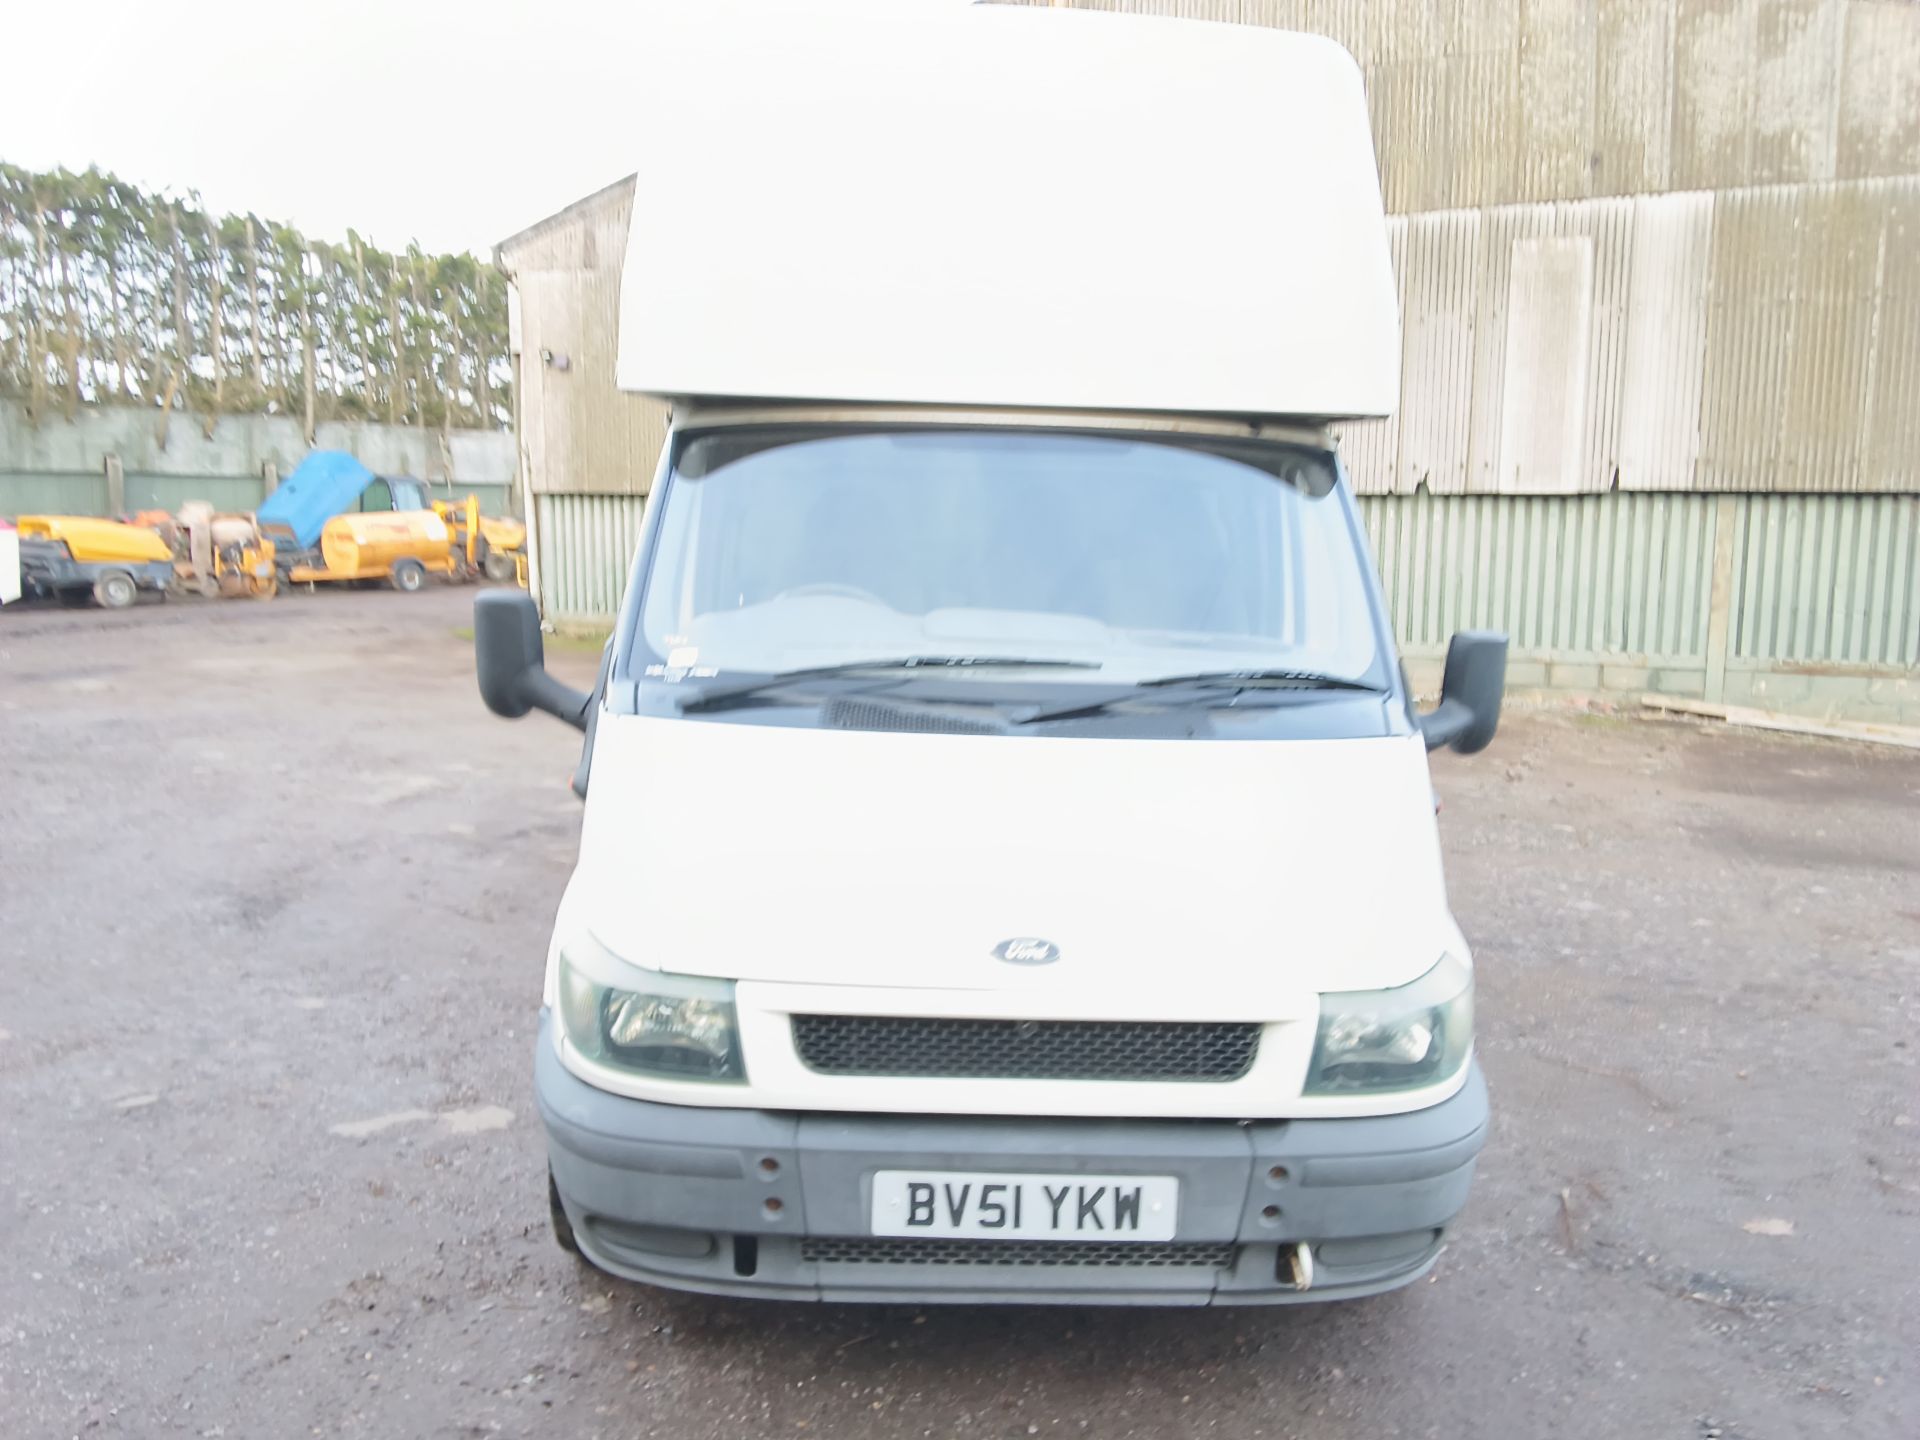 FORD TRANSIT TWIN WHEEL HORSE BOX REG: MOT UNTIL 23/11/24 WITH COPY OF V5. PREVIOUS INSURANCE - Image 2 of 9